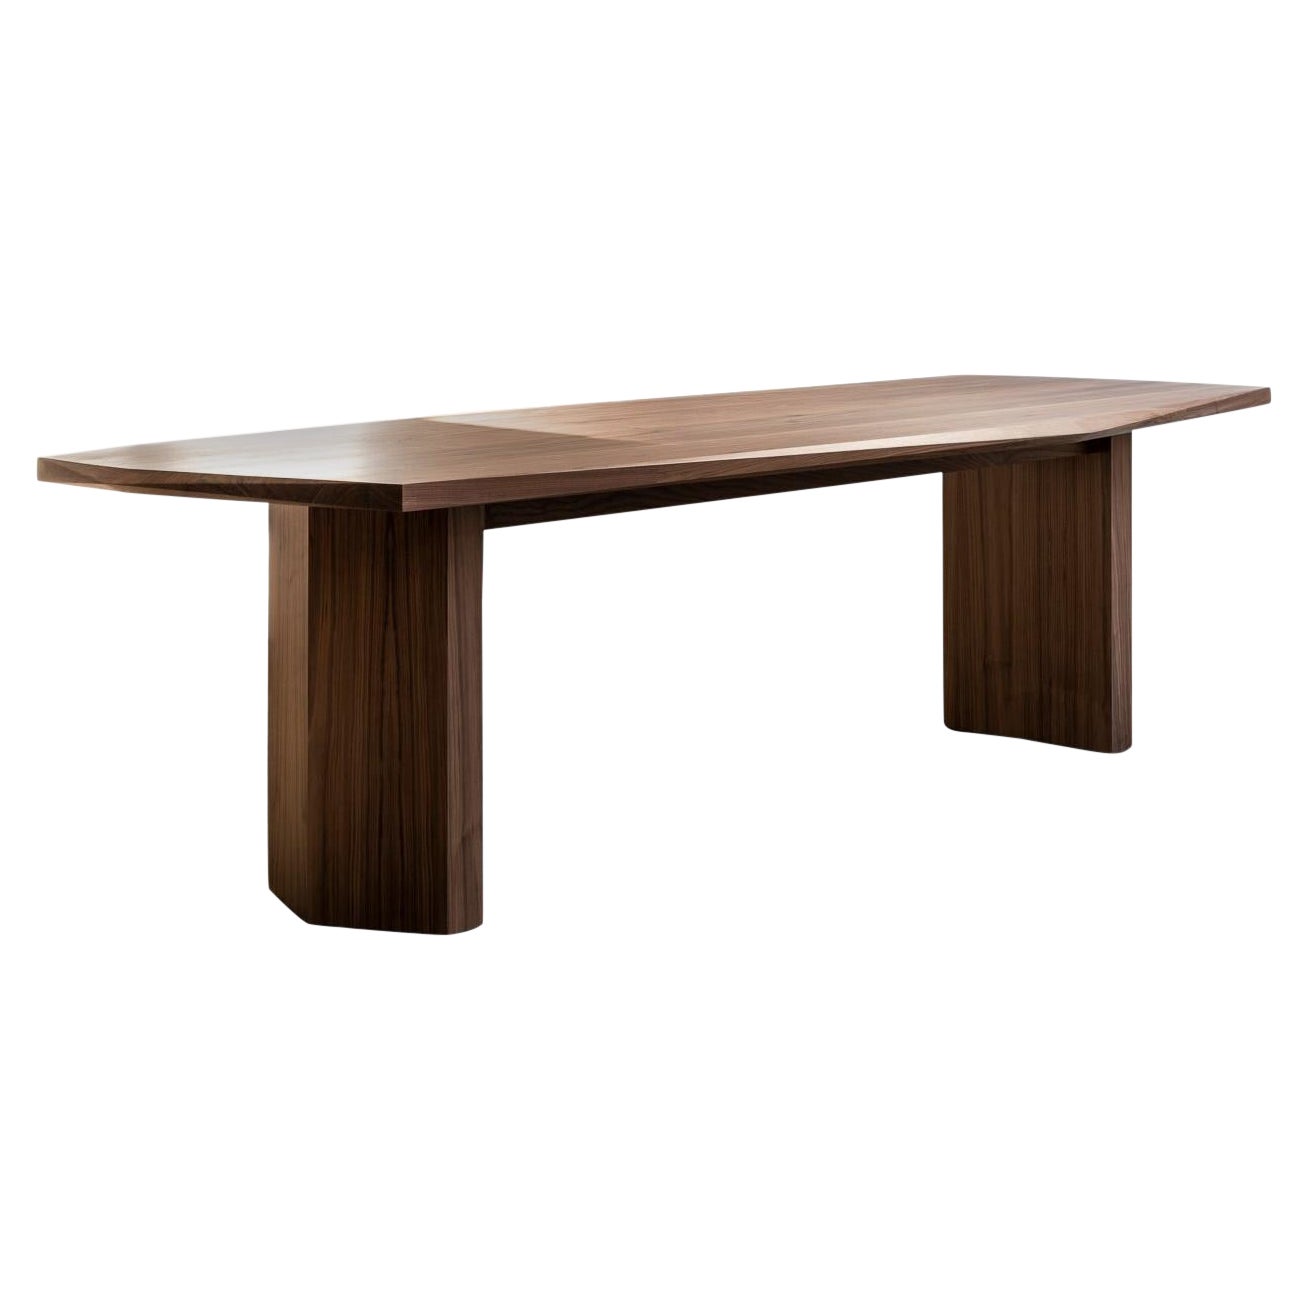 Contemporary Solid Walnut Hera Dining Table Big by Tim Vranken For Sale